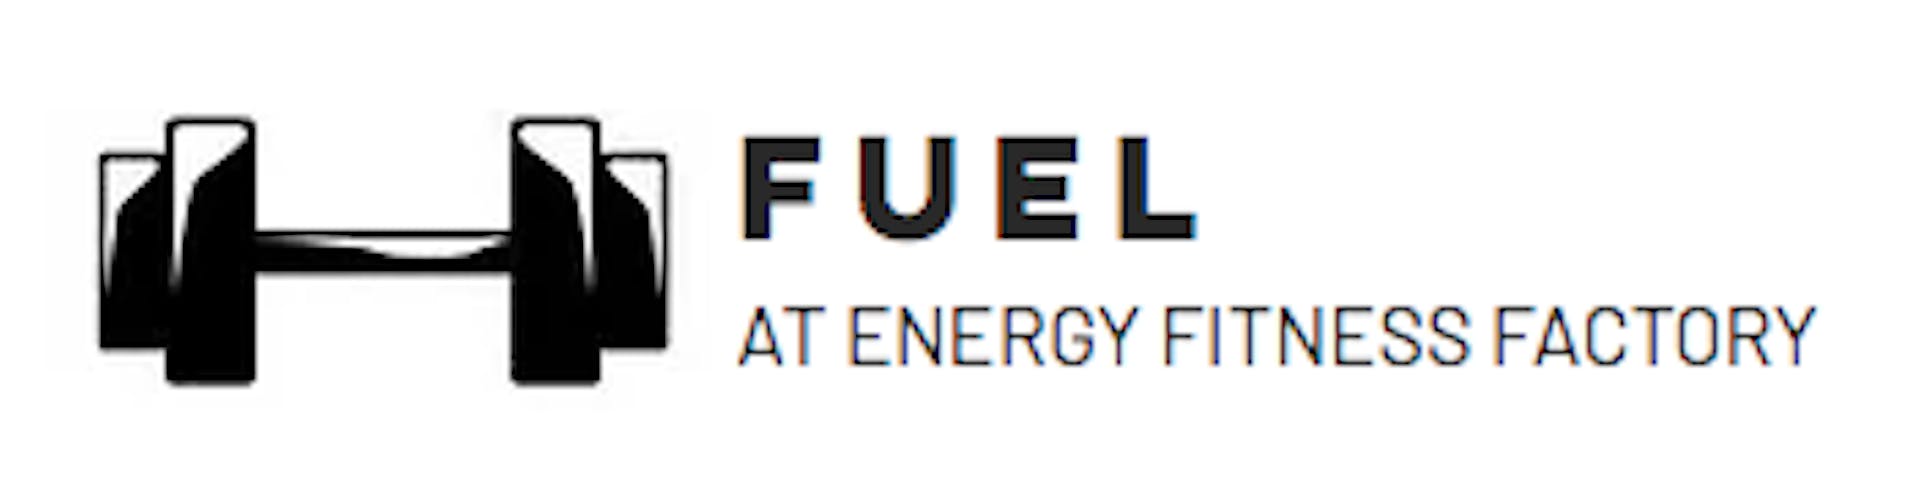 FUEL AT ENERGY